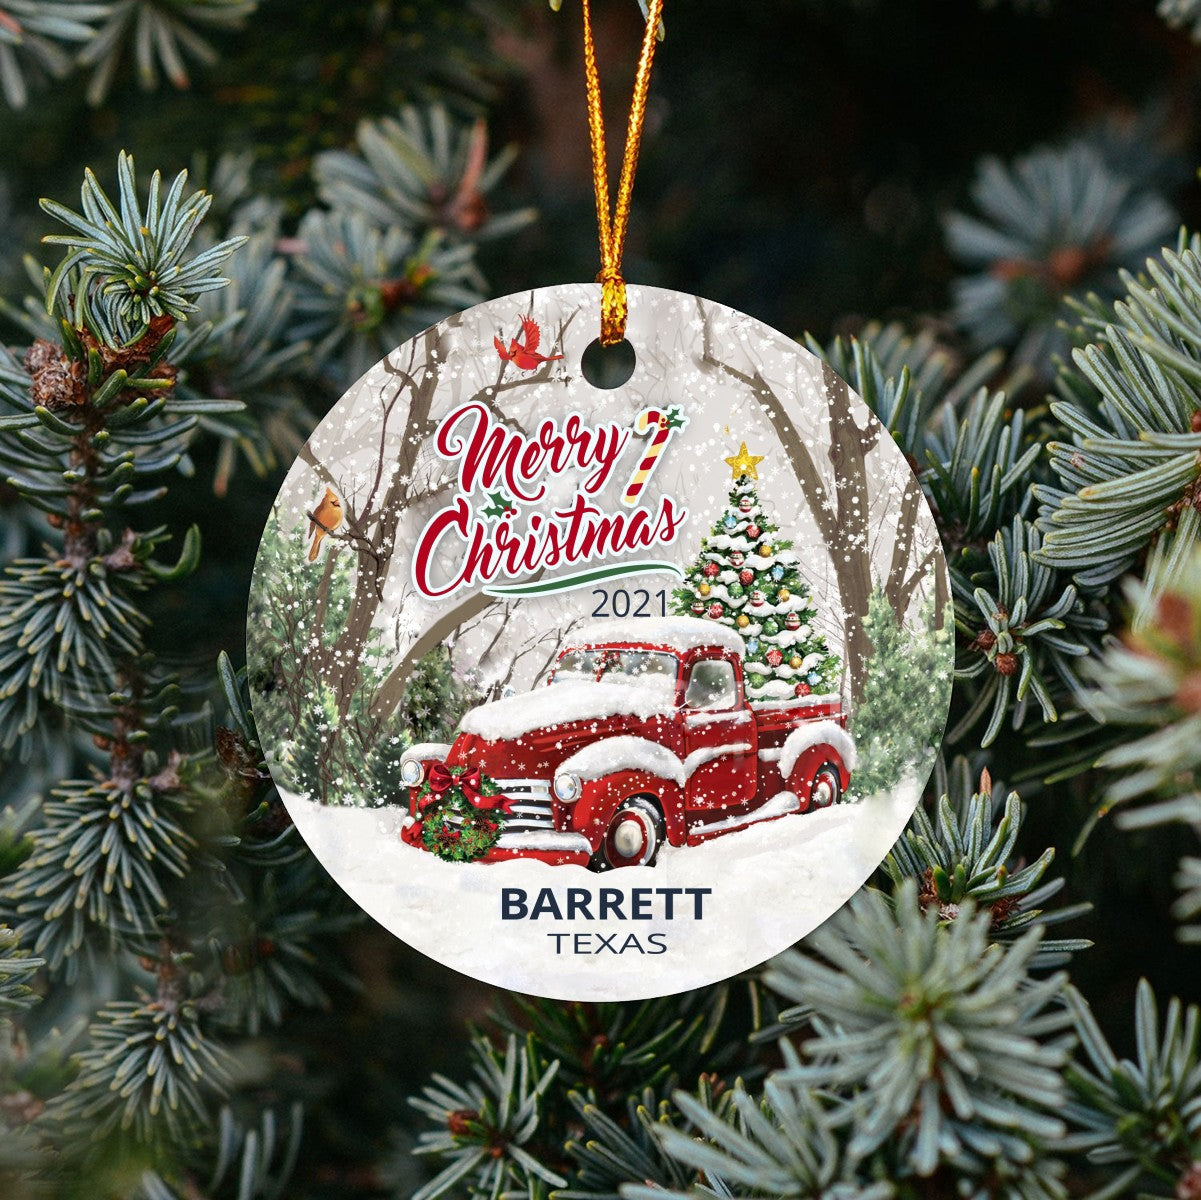 Christmas Tree Ornaments Barrett - Ornament With Name City, State Barrett Texas TX Ornament - Red Truck Xmas Ornaments 3'' Plastic Gift For Family, Friend And Housewarming